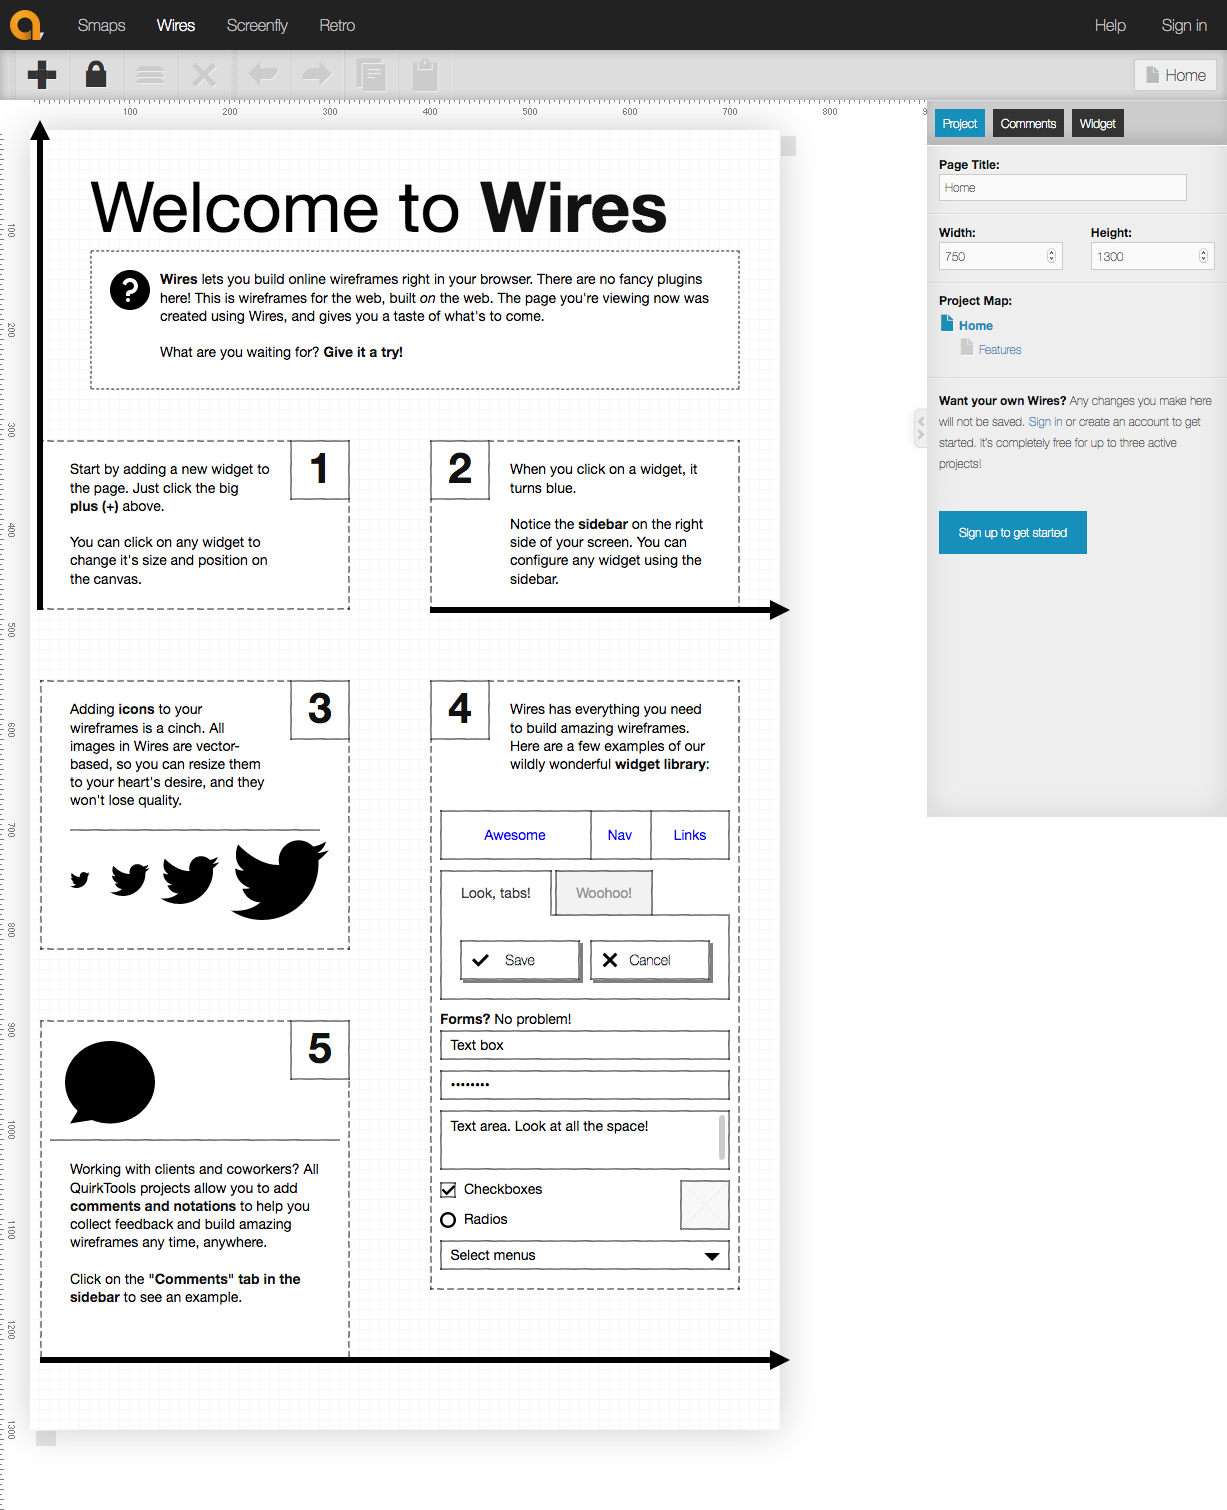 Wires - Build Online Wireframes Right in Your Browser.png